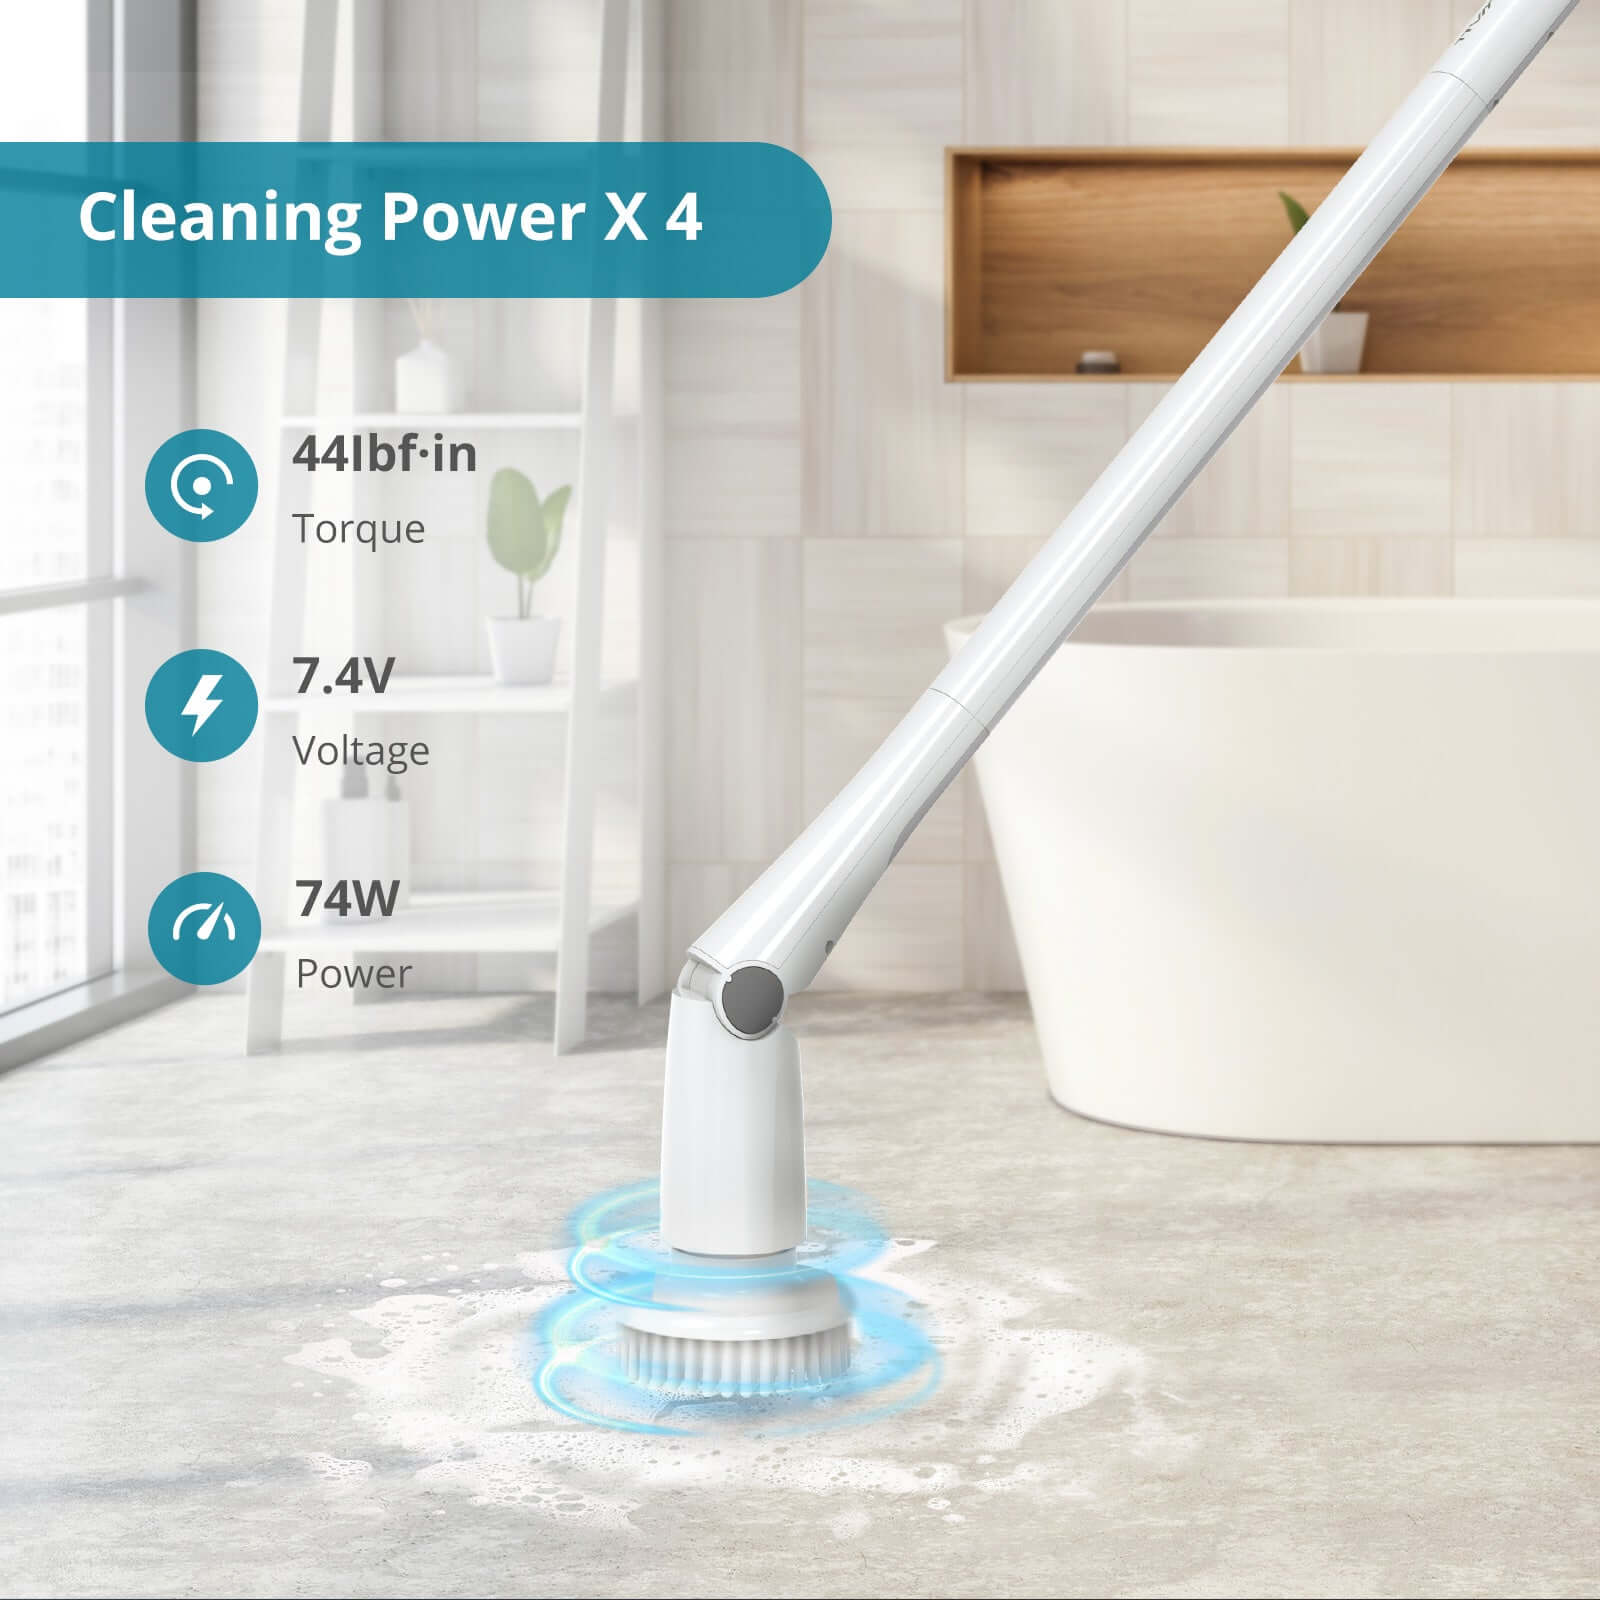 electric-power-cleaning-scrubber.jpg